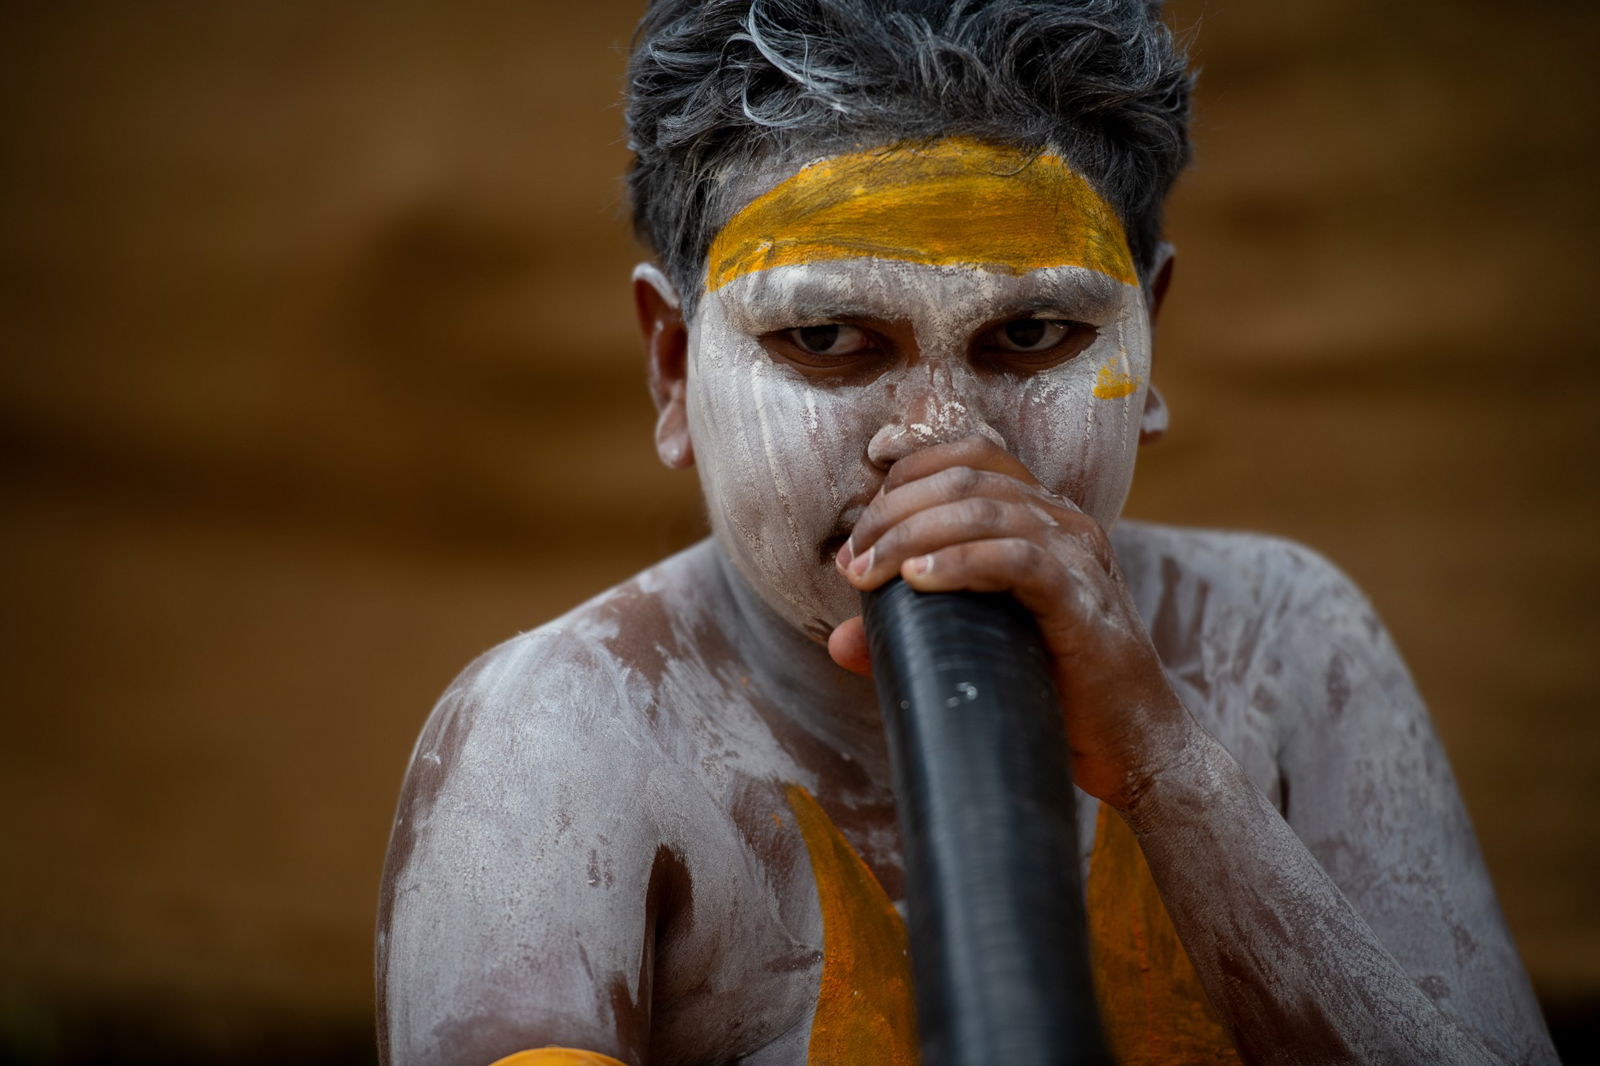 A young boy  in white and yellow body paint.